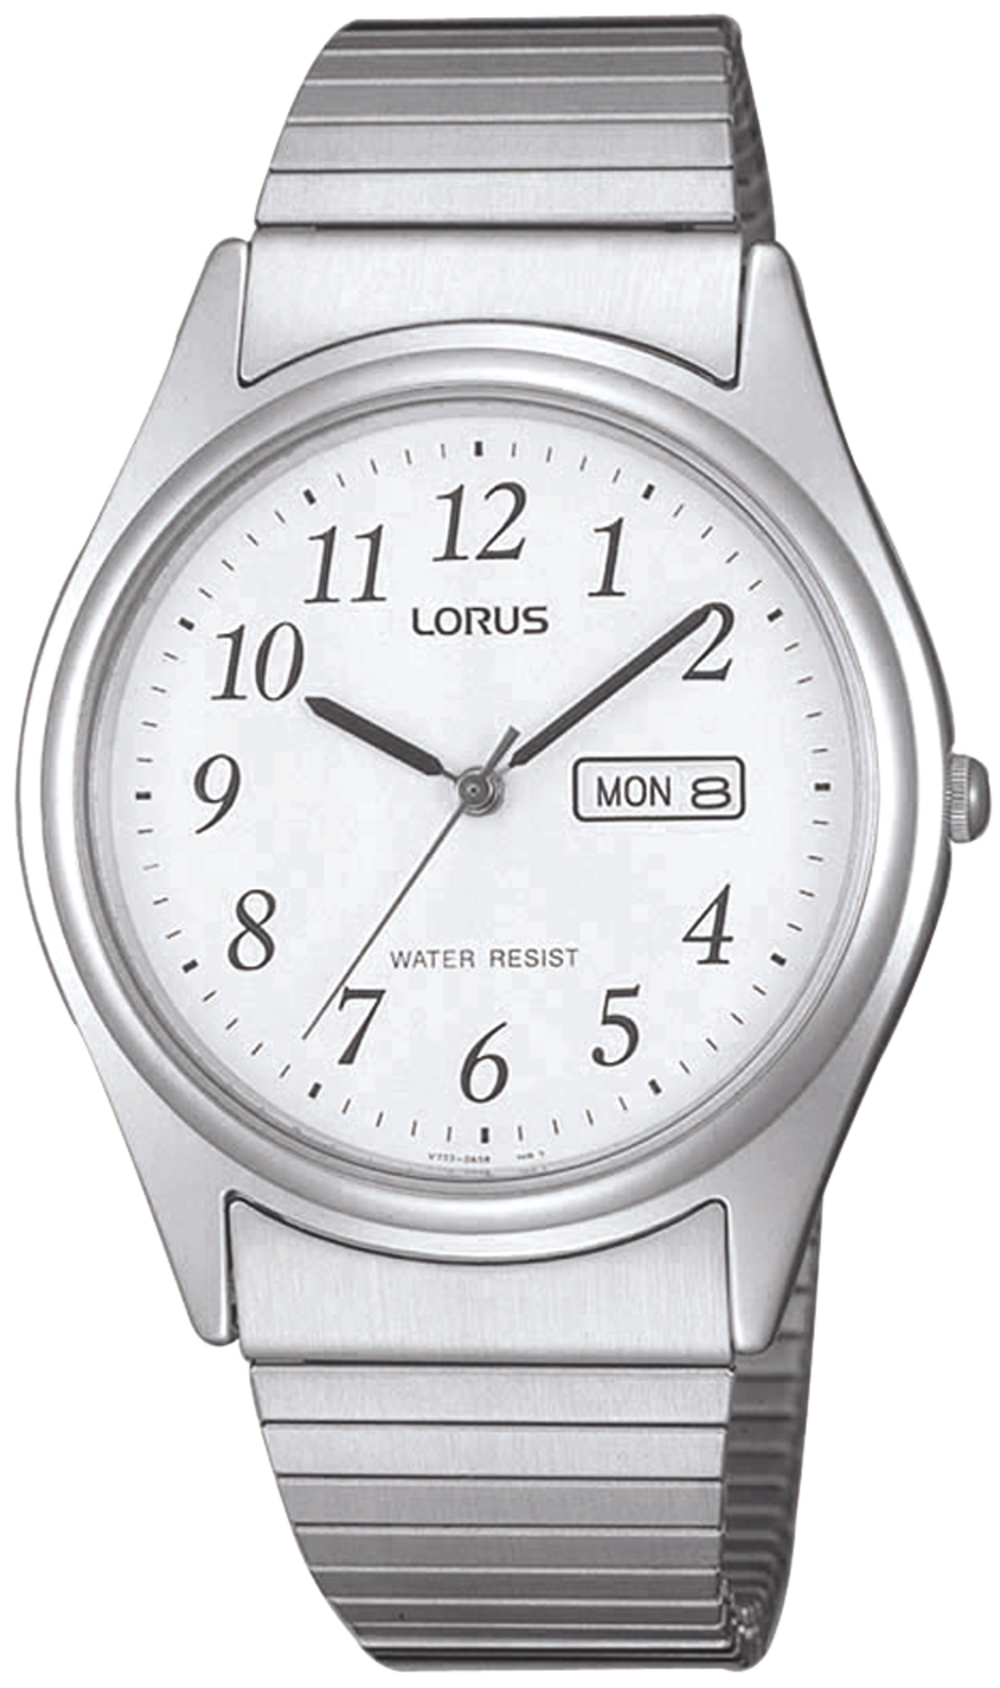 Lorus Ladies Watch in Silver | Angus & Coote